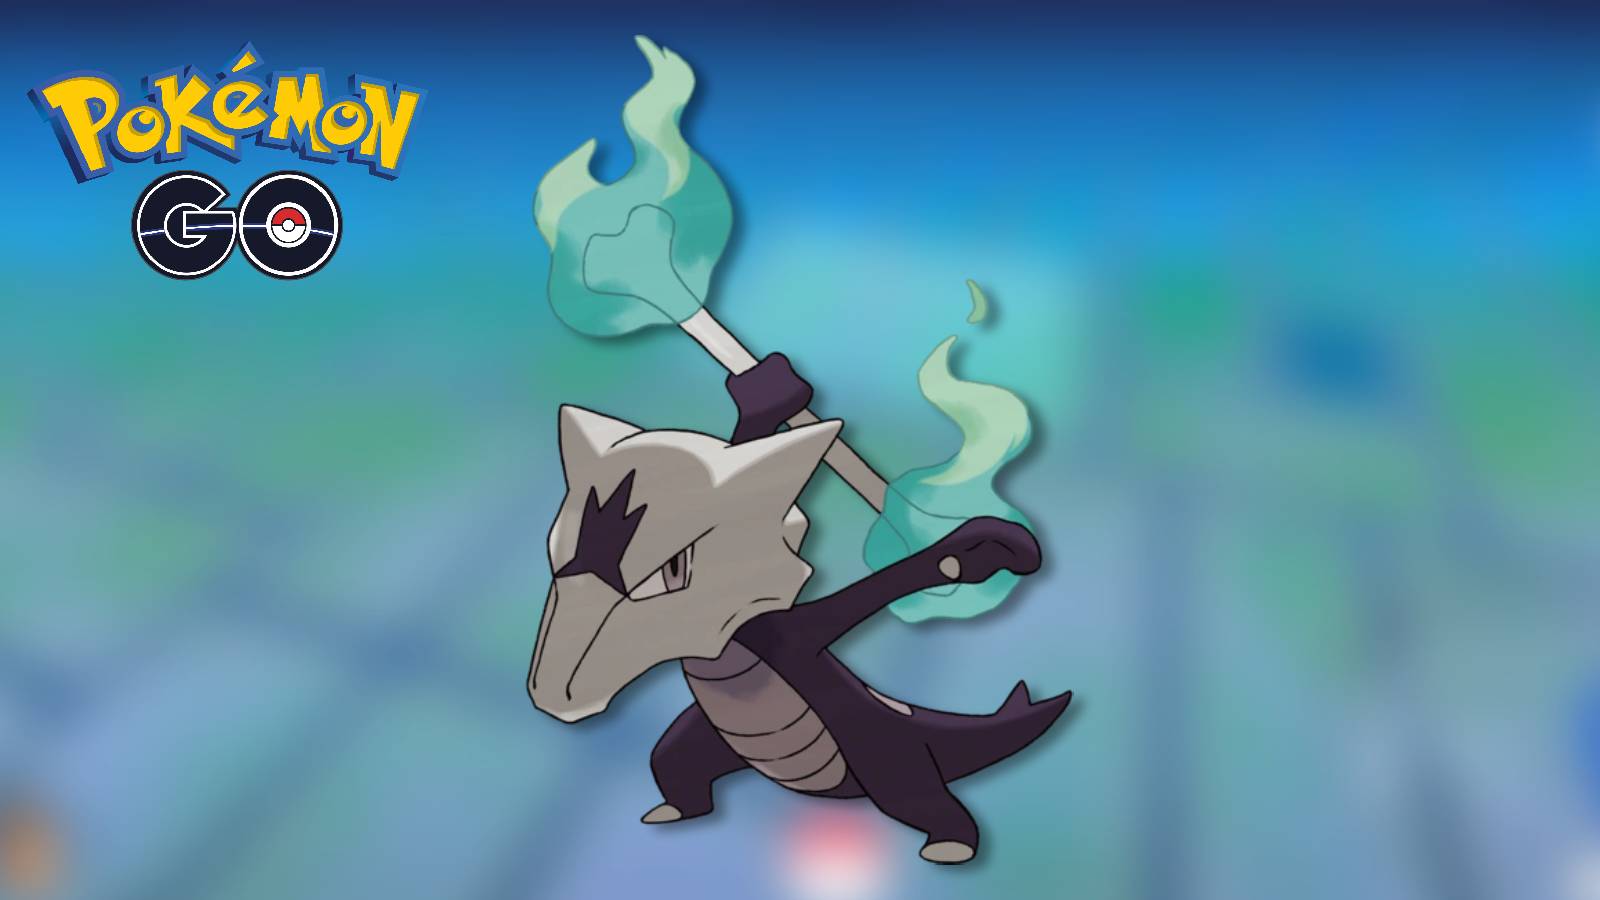 The Pokemon Marowak appears against a blurred background